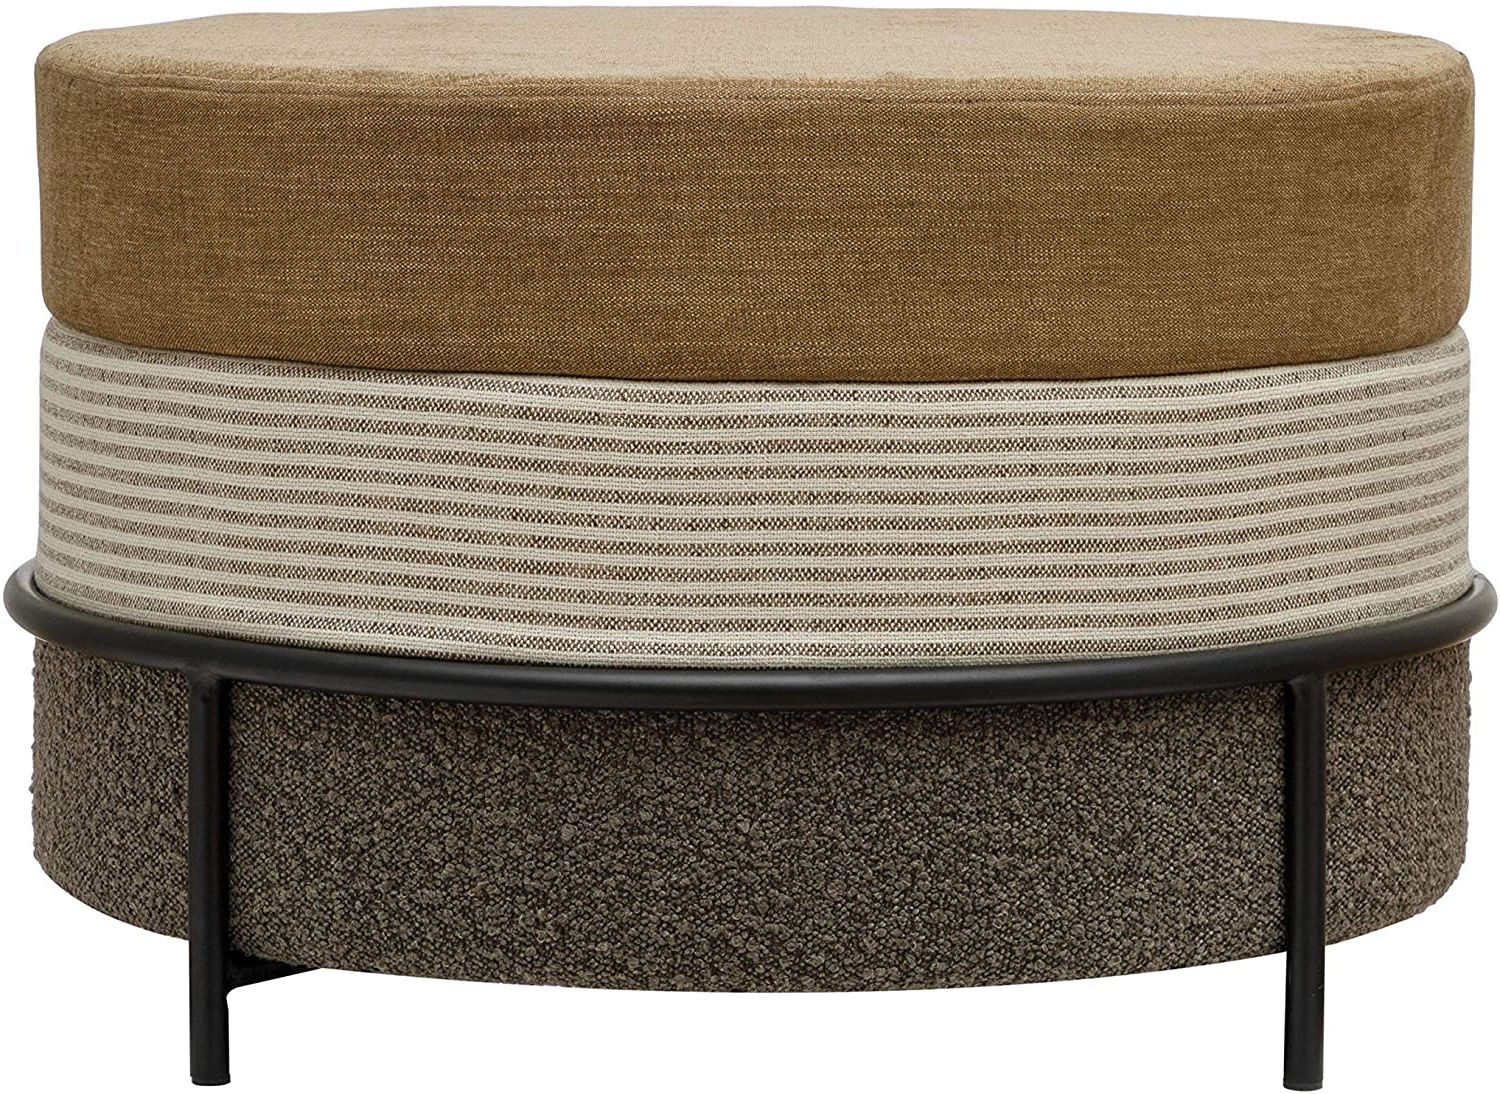 2018 Amazon: Bloomingville Mdf & Fabric Upholstered Ottoman With Black Pertaining To Black Fabric Ottomans With Fringe Trim (View 1 of 10)